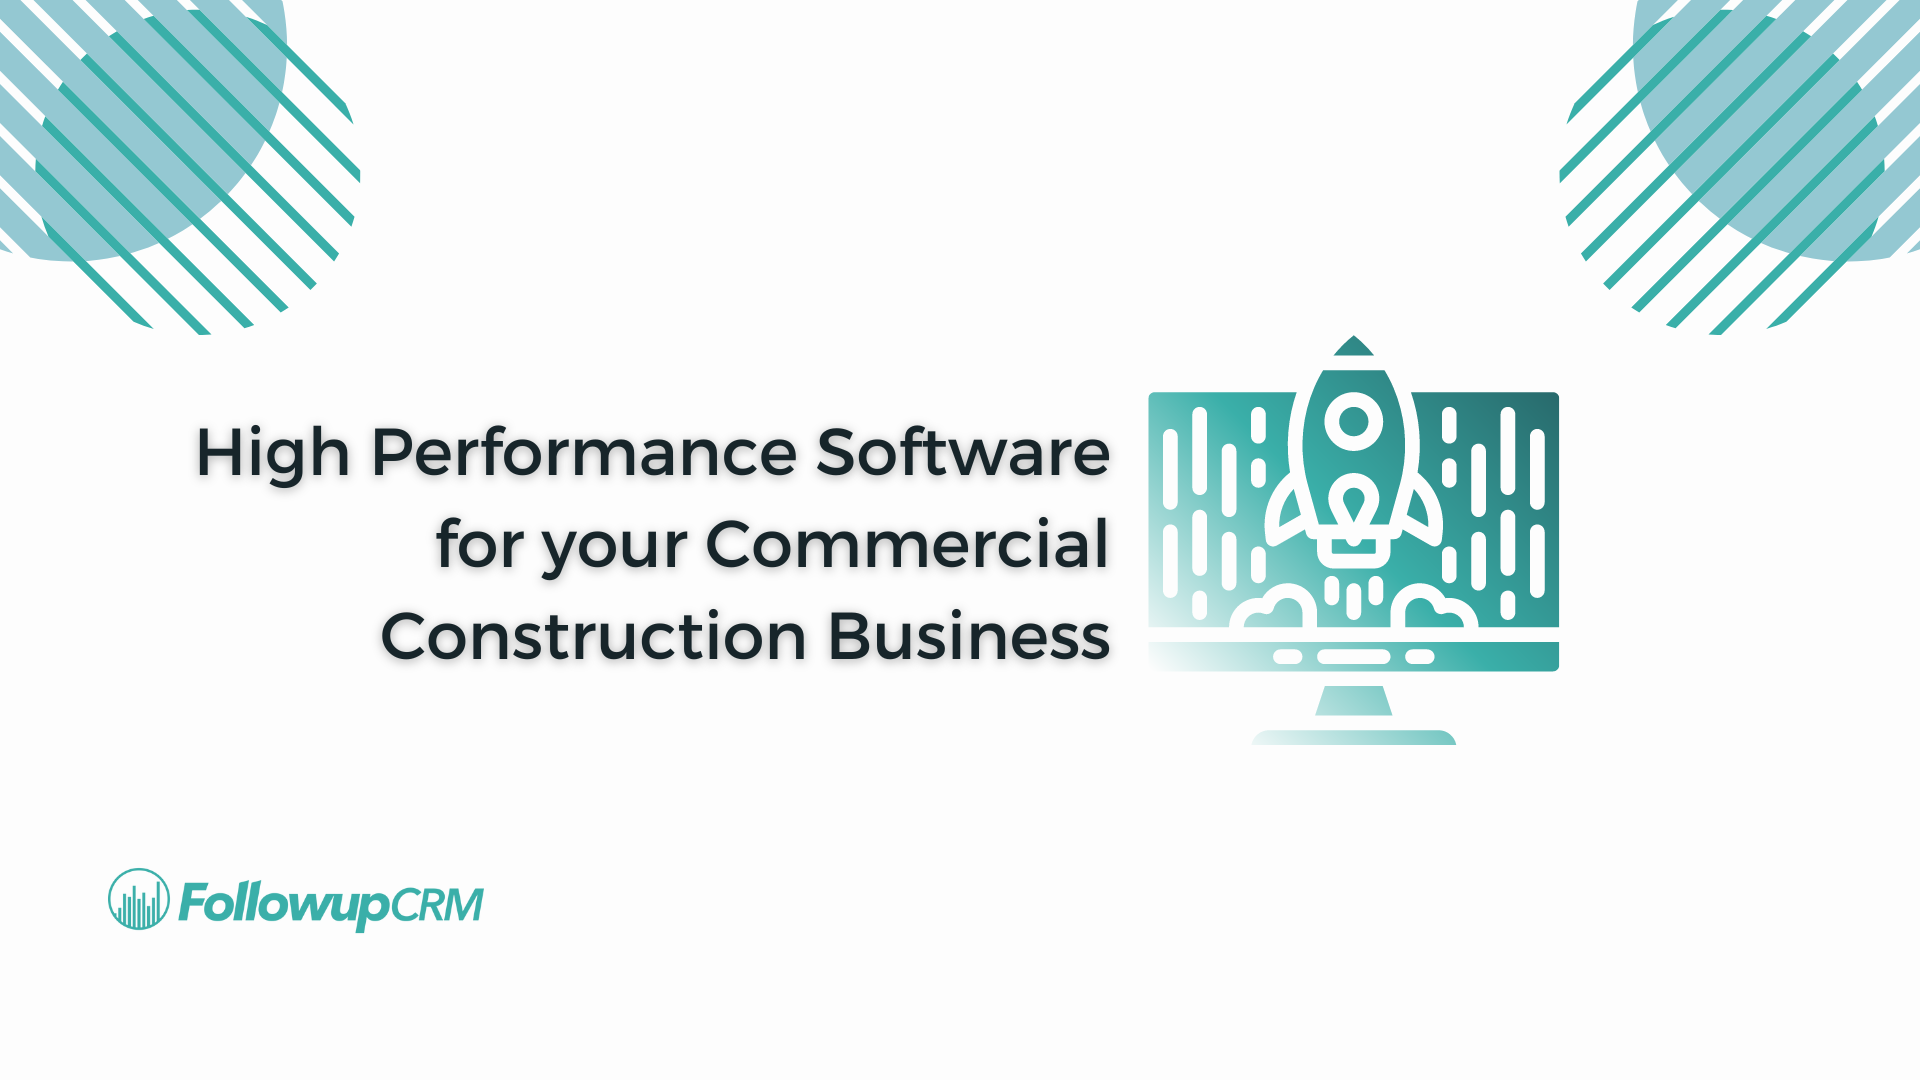 High Performance Software for your Commercial Construction Business